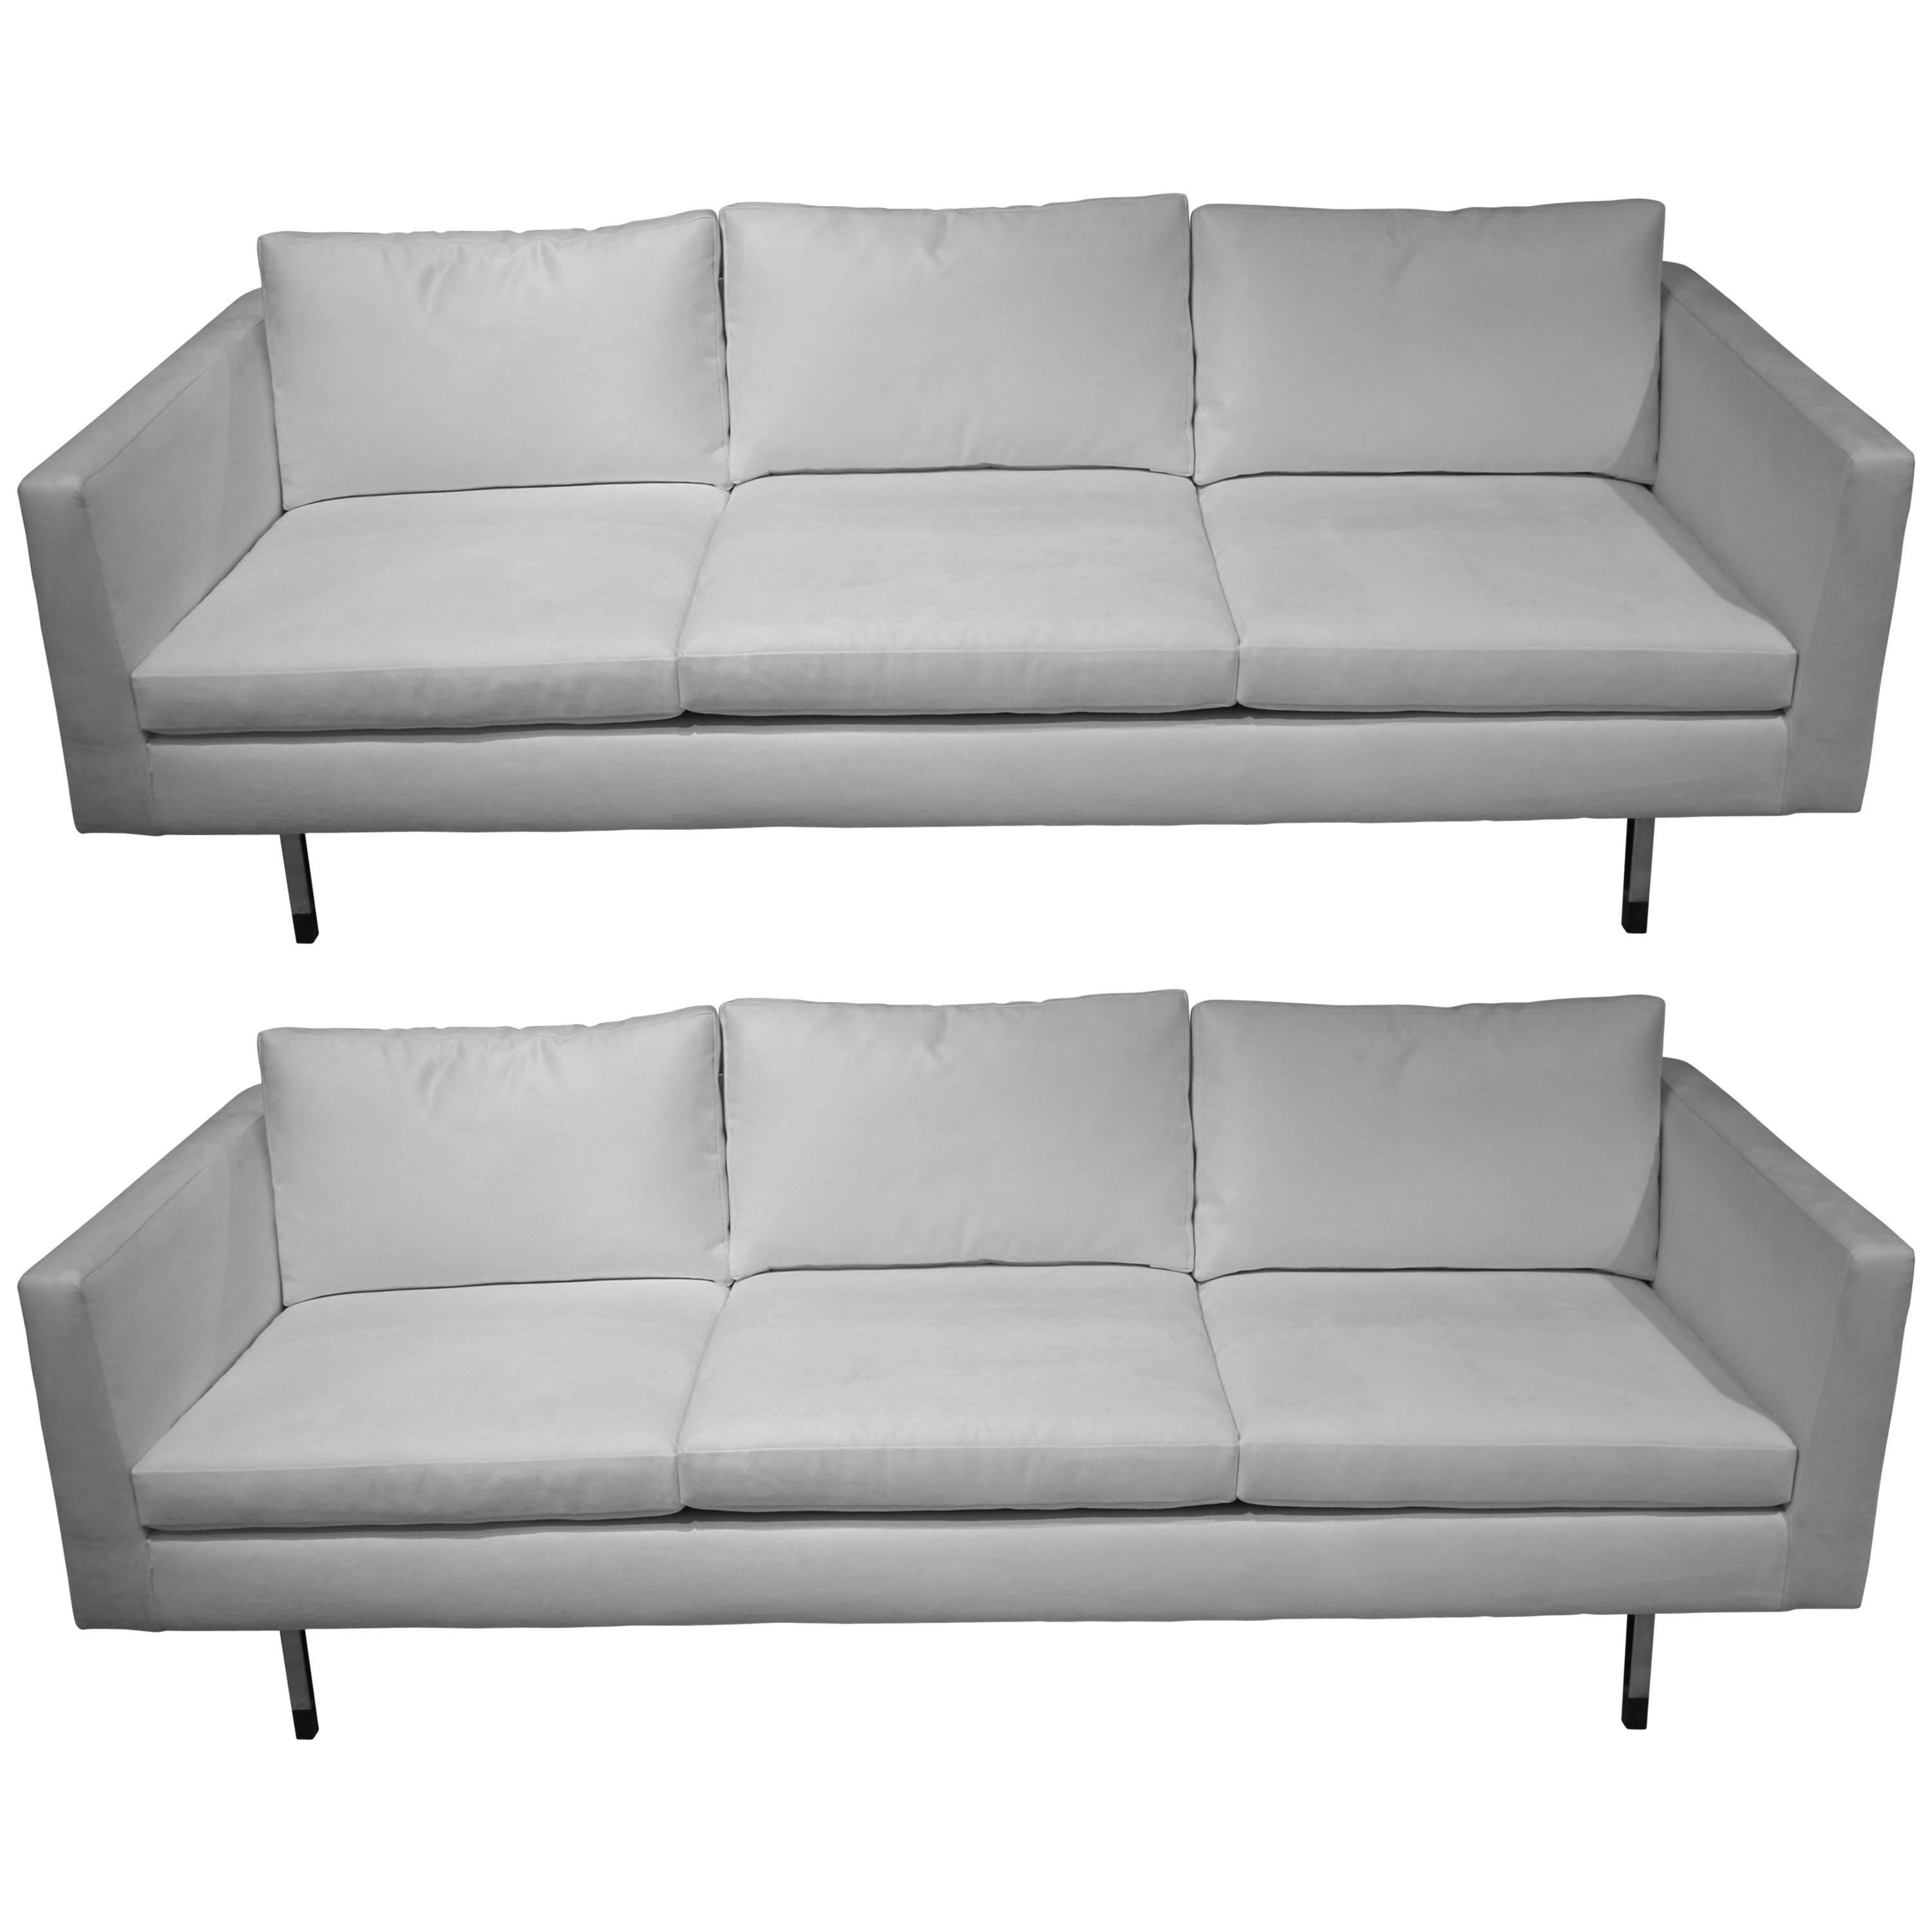 Pair of Sofas For Sale